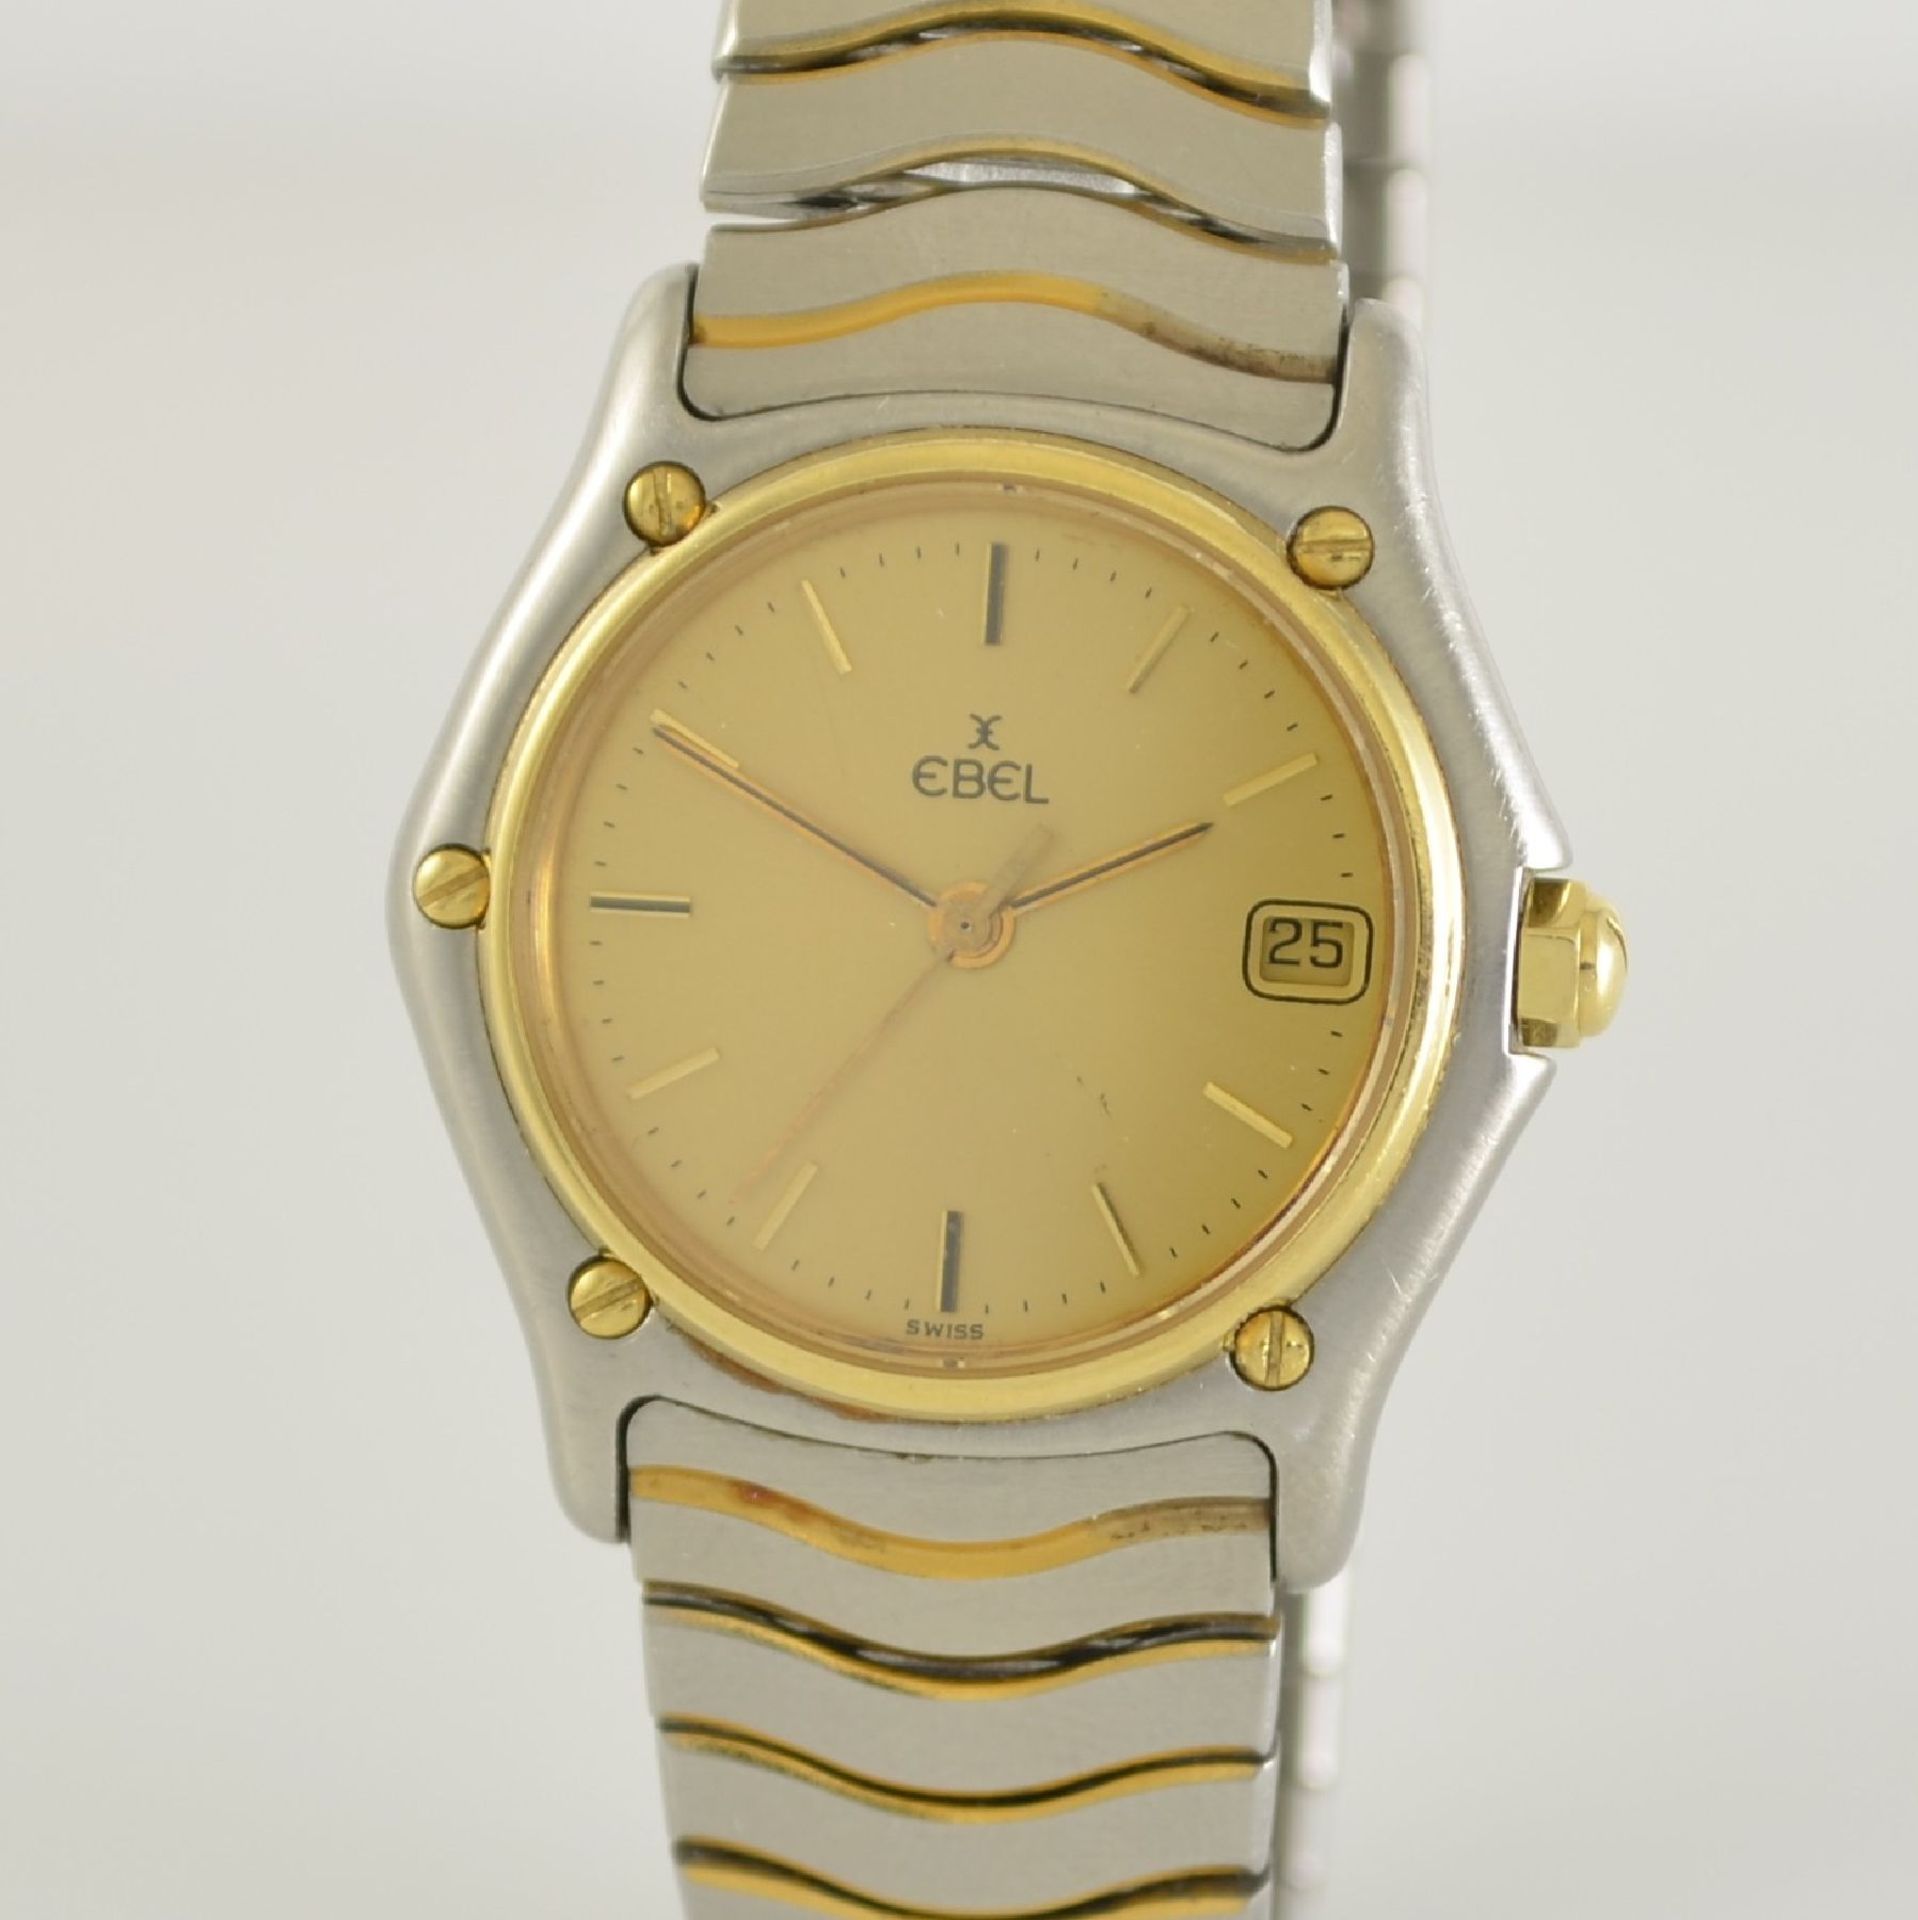 EBEL Sport Classique ladies wristwatch, reference 183908, stainless steel/gold combined including - Bild 4 aus 7